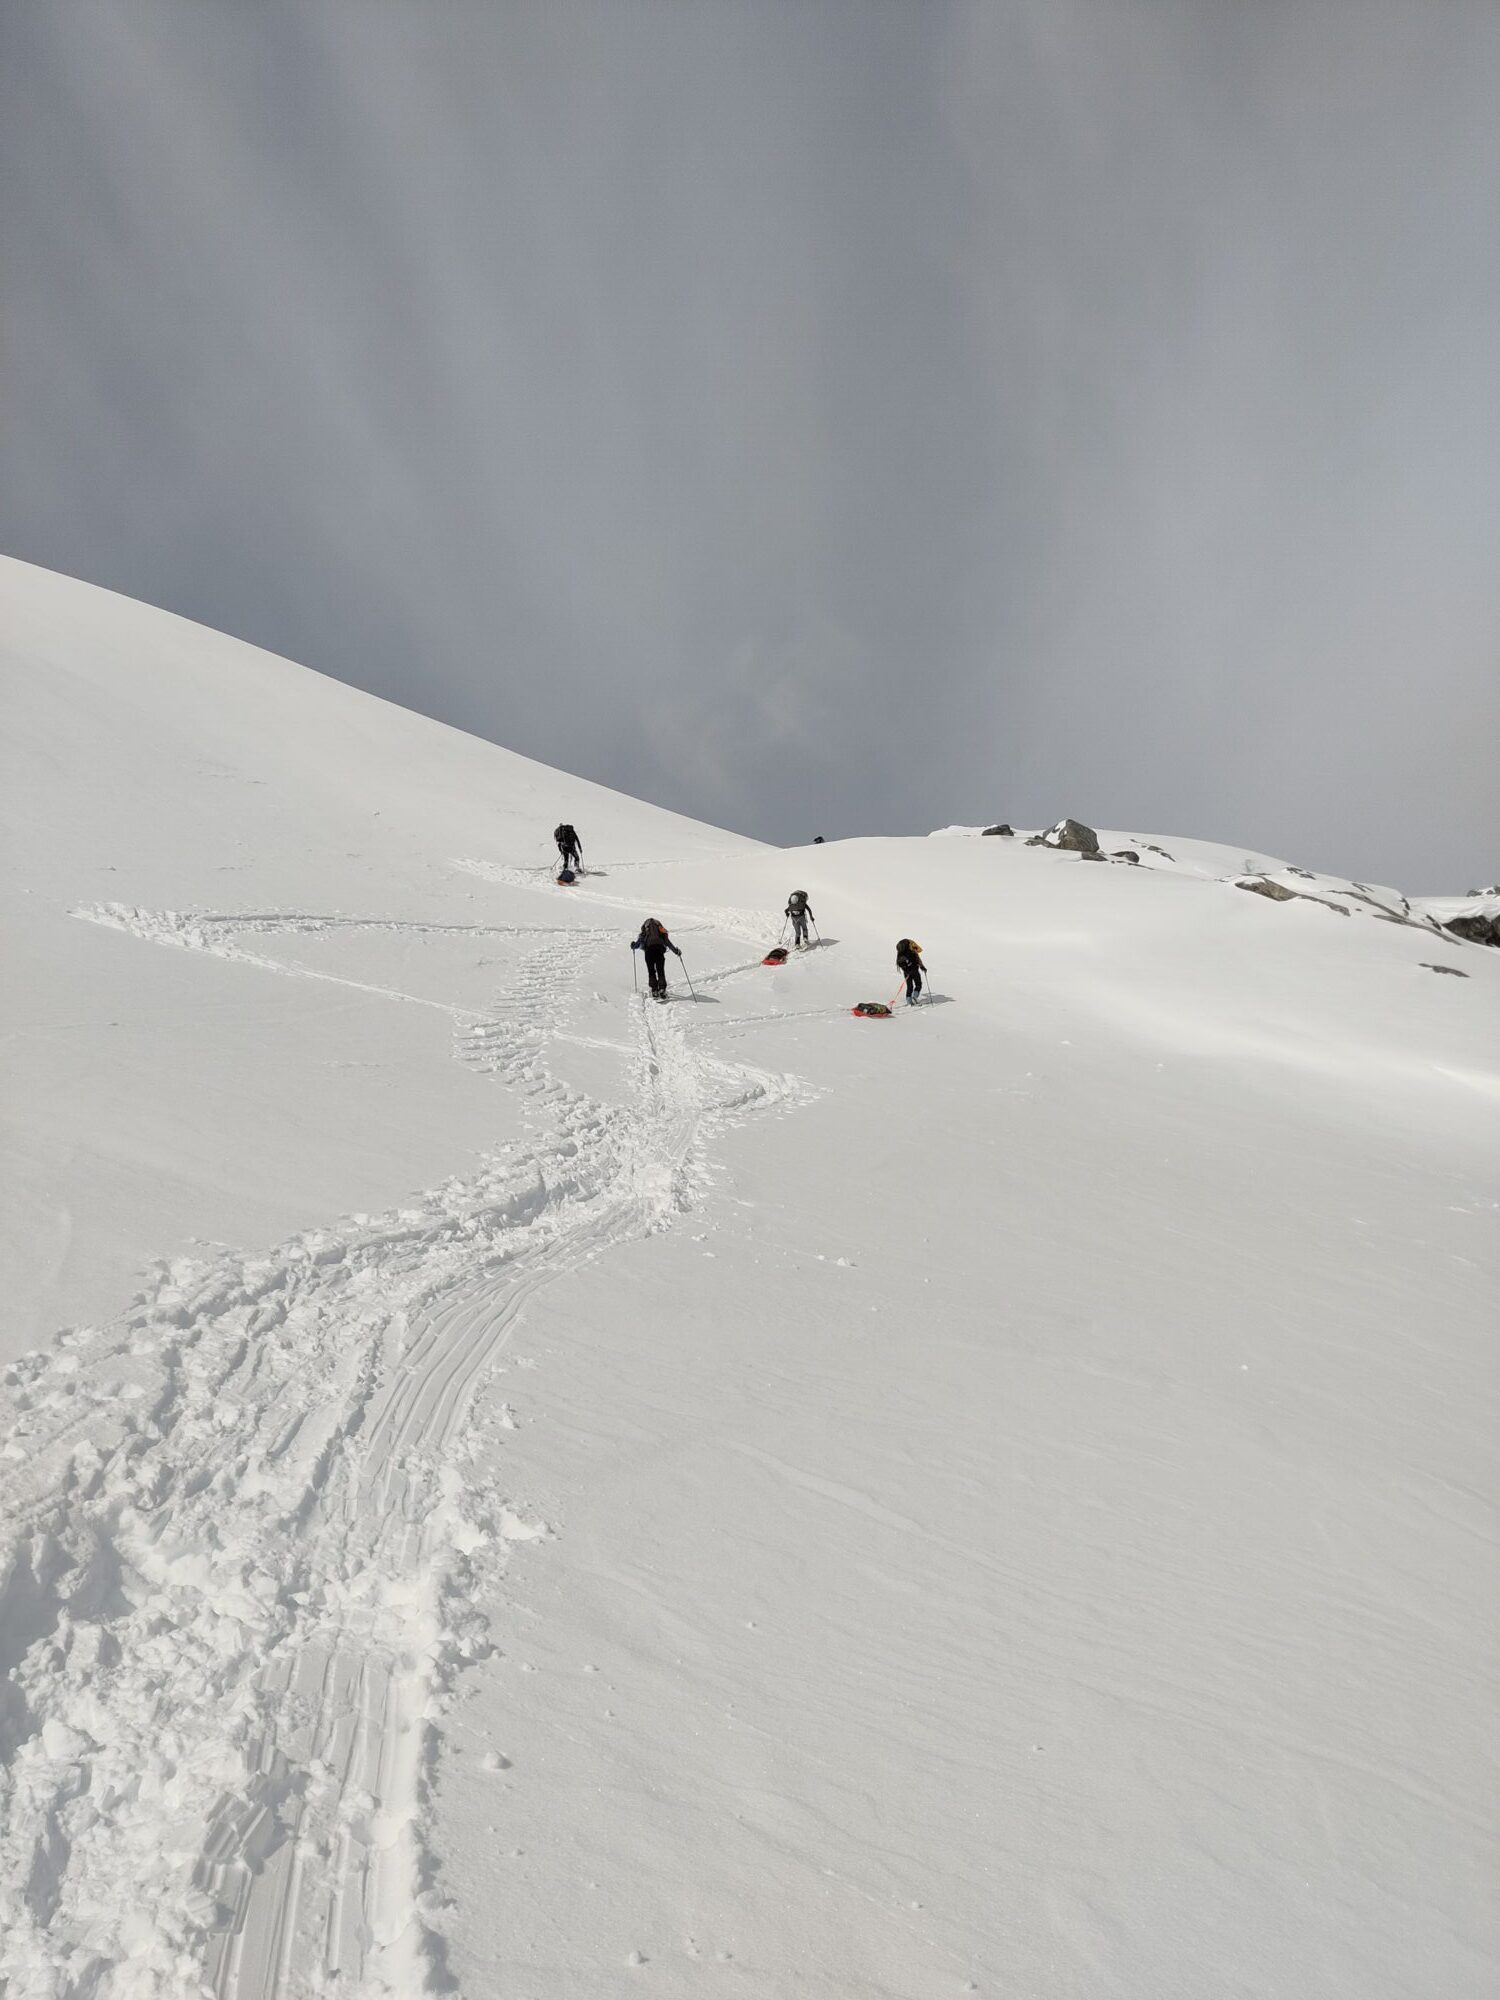 A group of researchers wants to help communities living close to melting glaciers. Photo shows scientists skiing on a glacier.